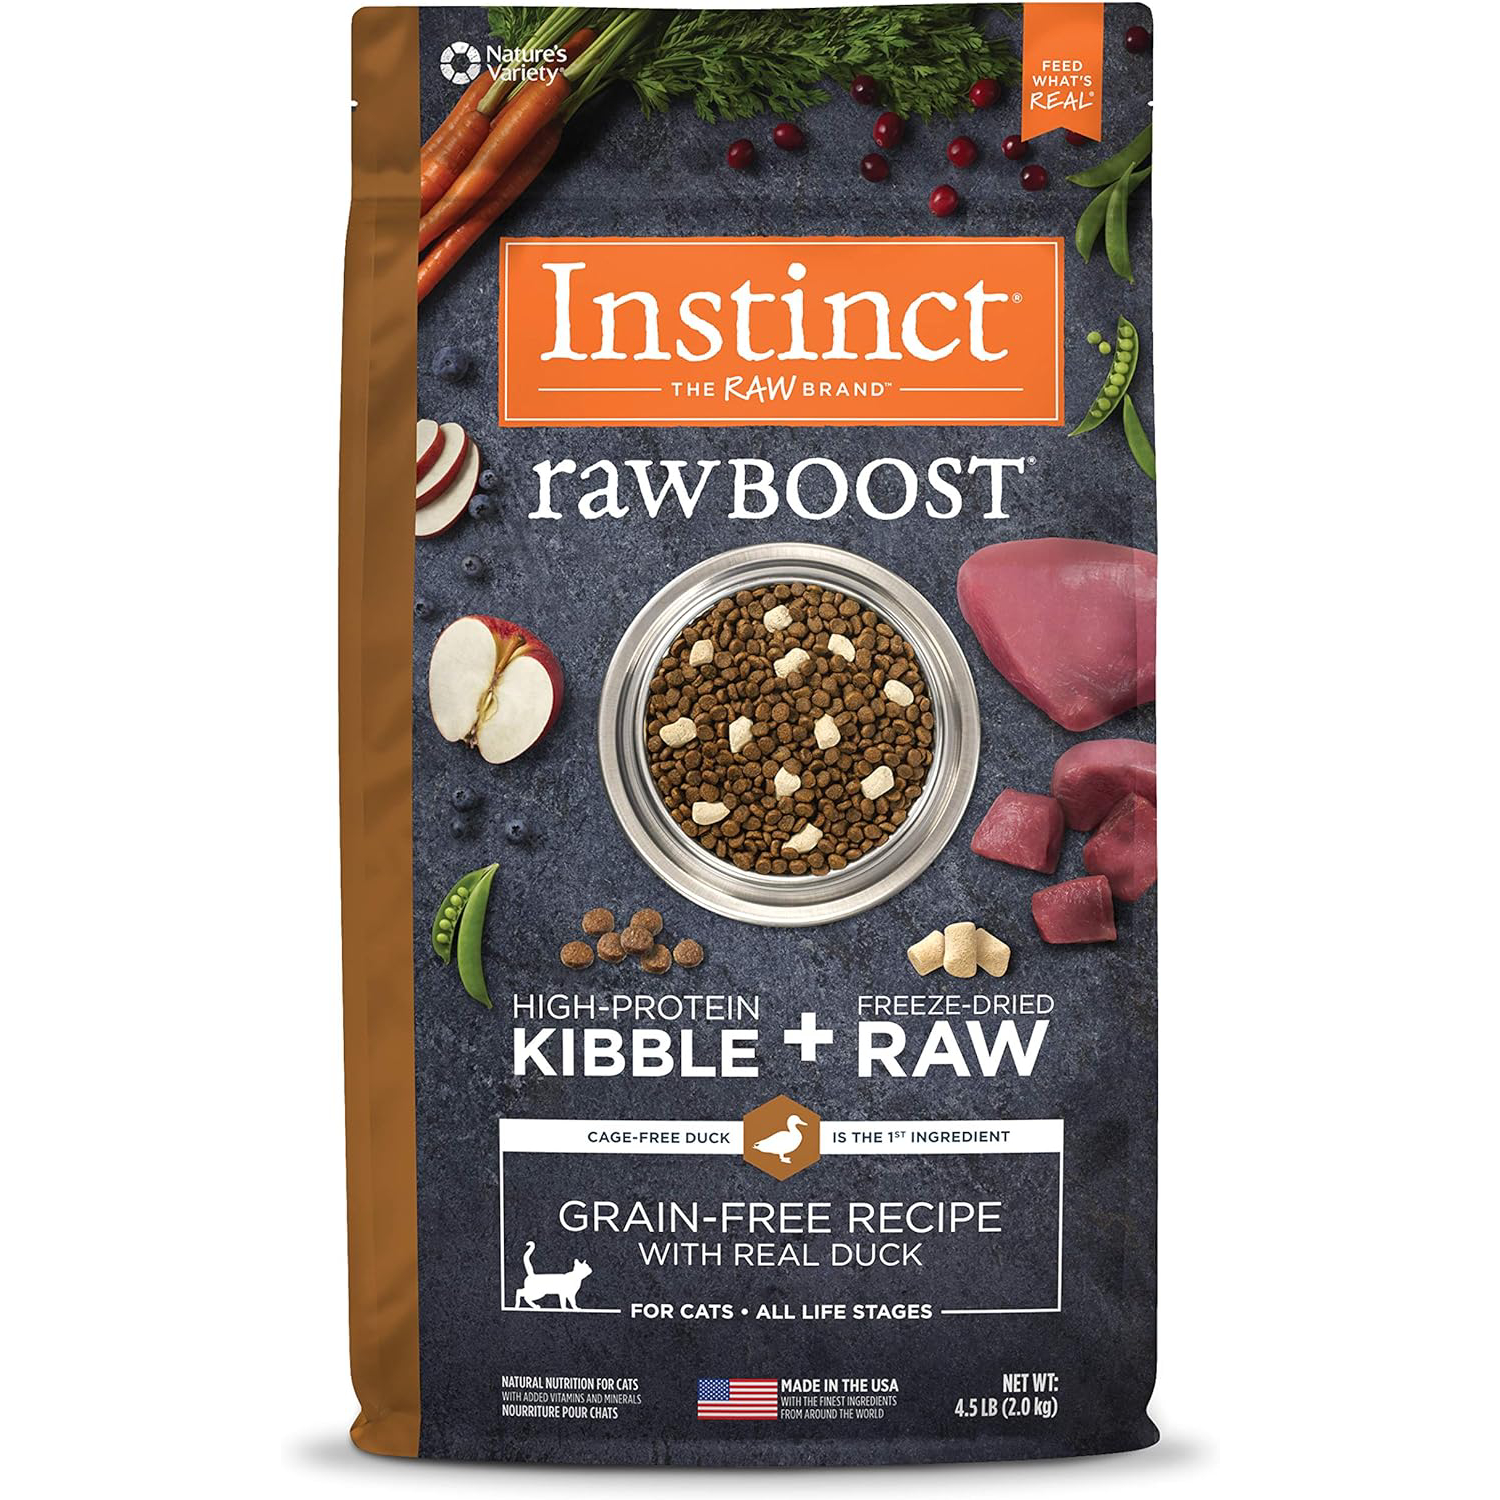 nstinct Raw Boost Grain Free Recipe with Real Duck Natural Dry Cat Food New